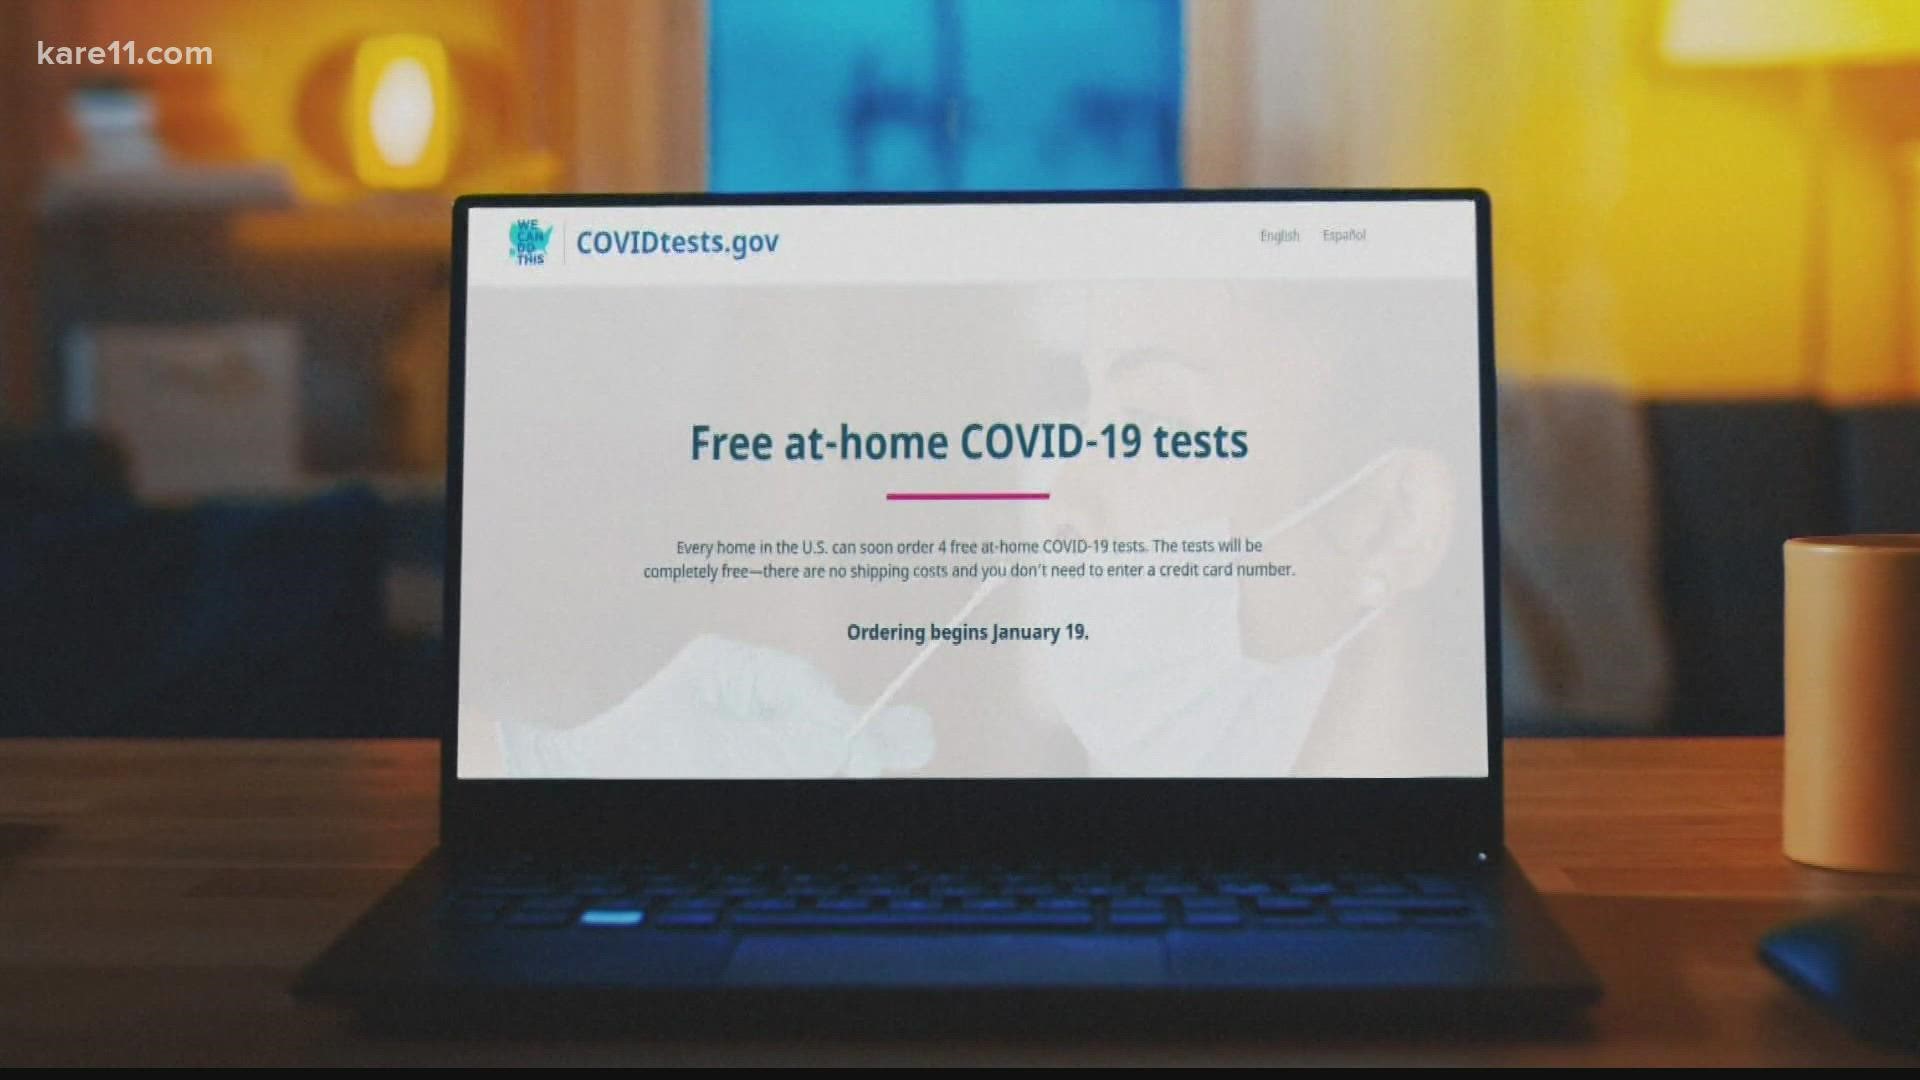 The Biden administration on Tuesday quietly launched its website for Americans to request free at-home COVID-19 tests, a day before the official launch.